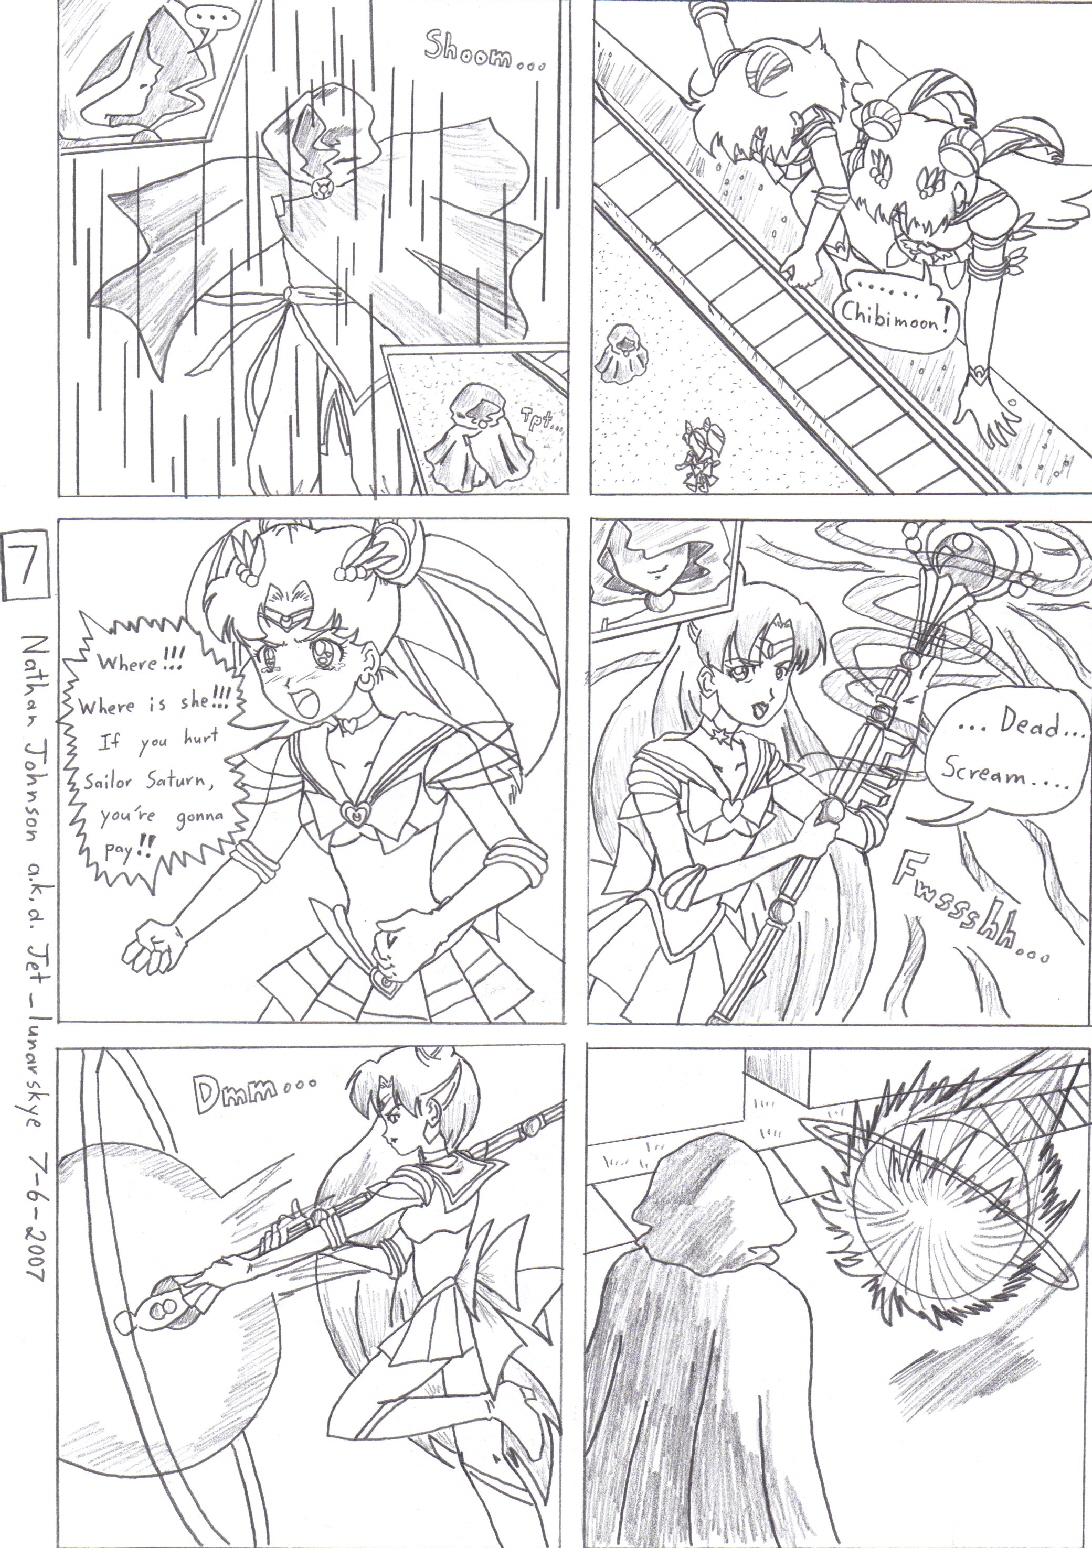 Sailor Moon Stars: The Nightmare Soldier page 7 by Jet_lunarskye